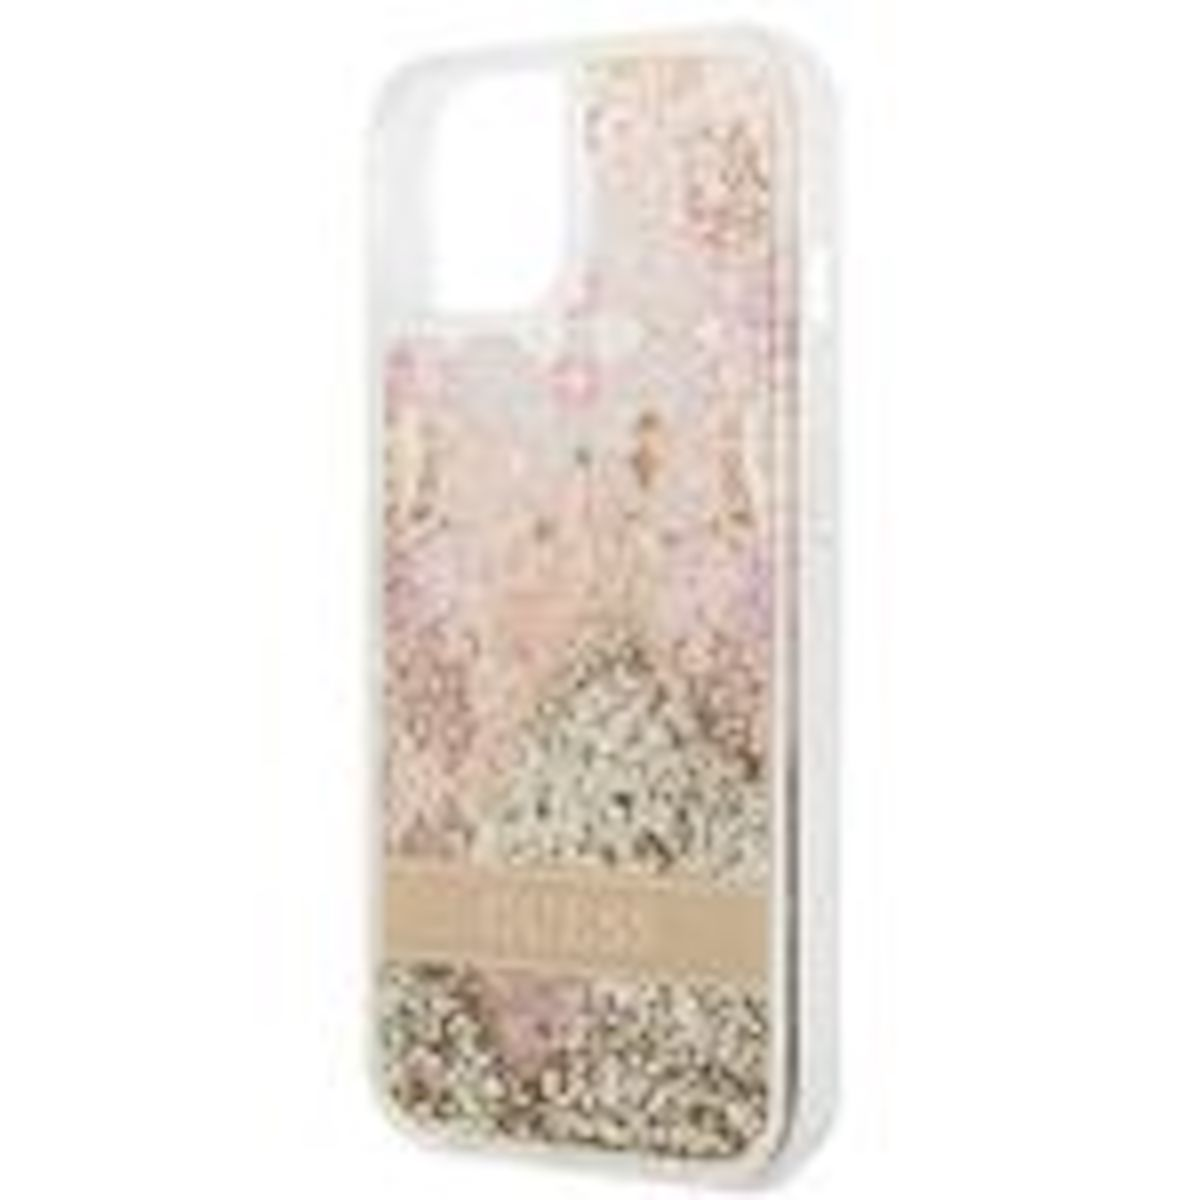 Backcover, iPhone Cover, Liquid 14 Design Apple, Paisley GUESS Plus, Gold Glitter